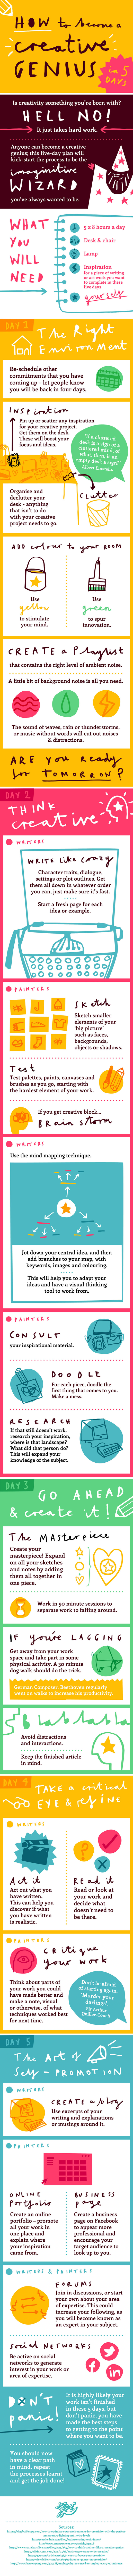 How to Become a Creative Genius in 5 Days